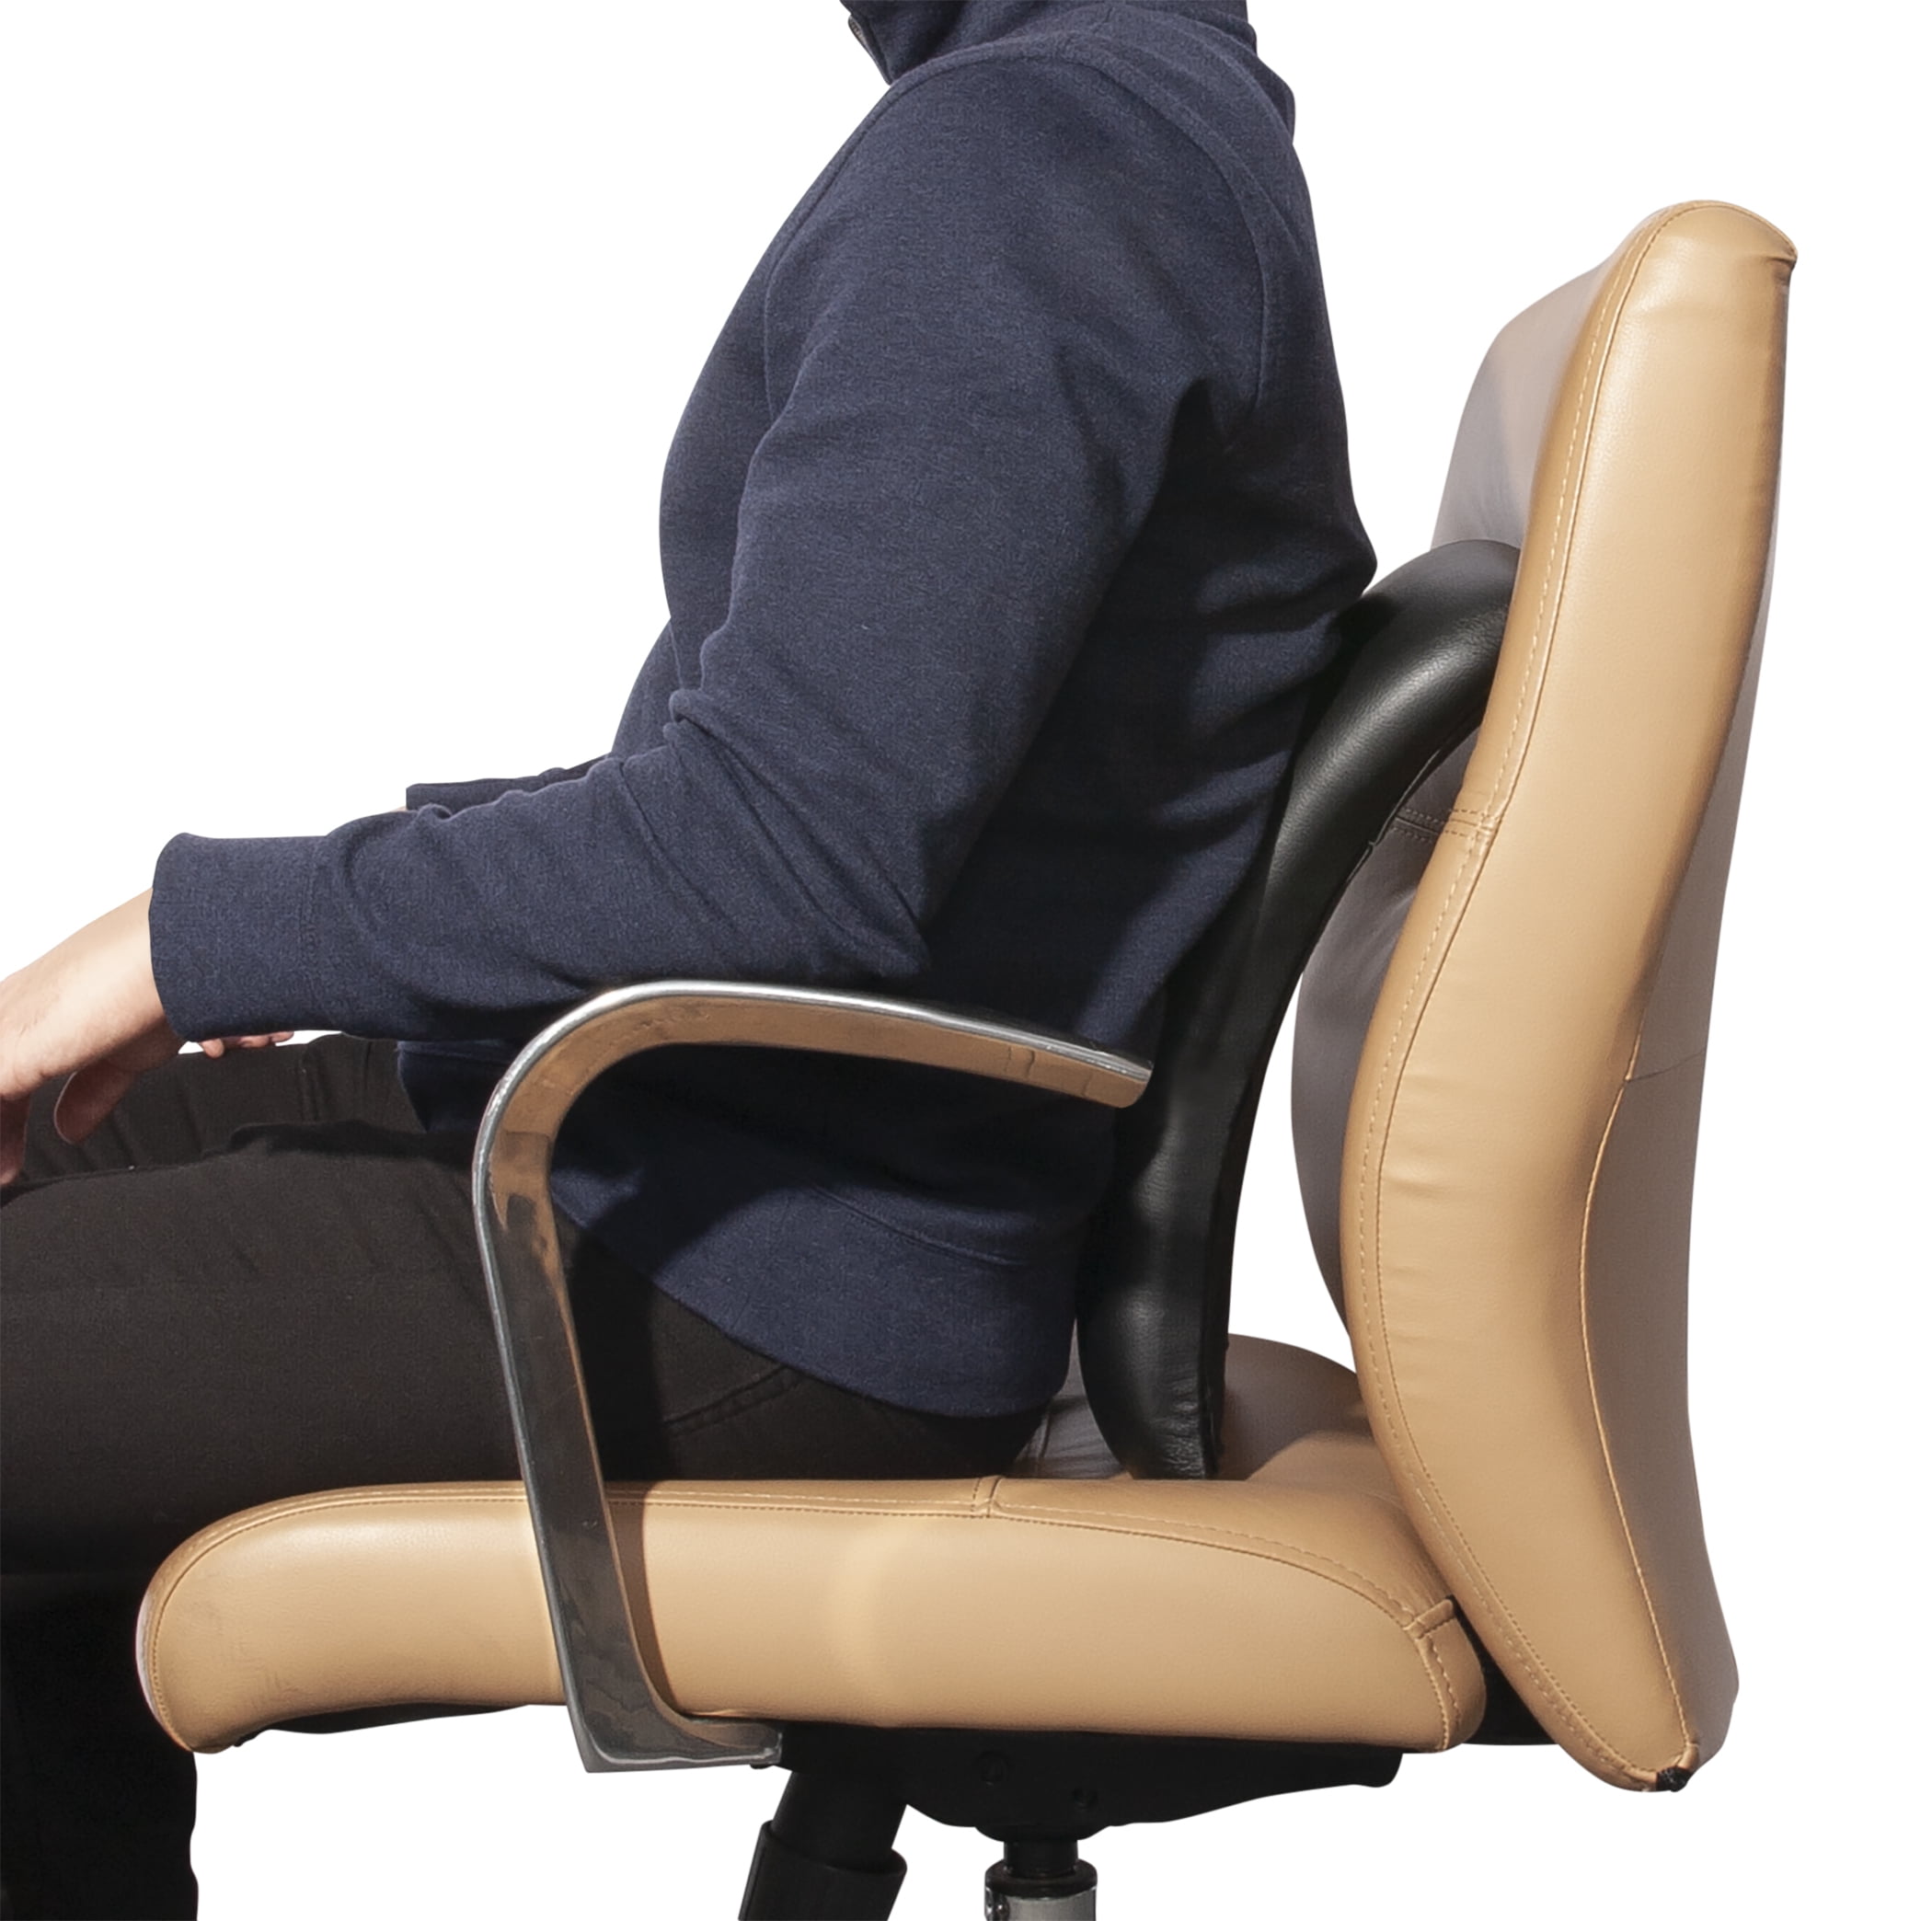 North American Healthcare - Arched Back Stretcher - Great for back stretch and usage as a spine board